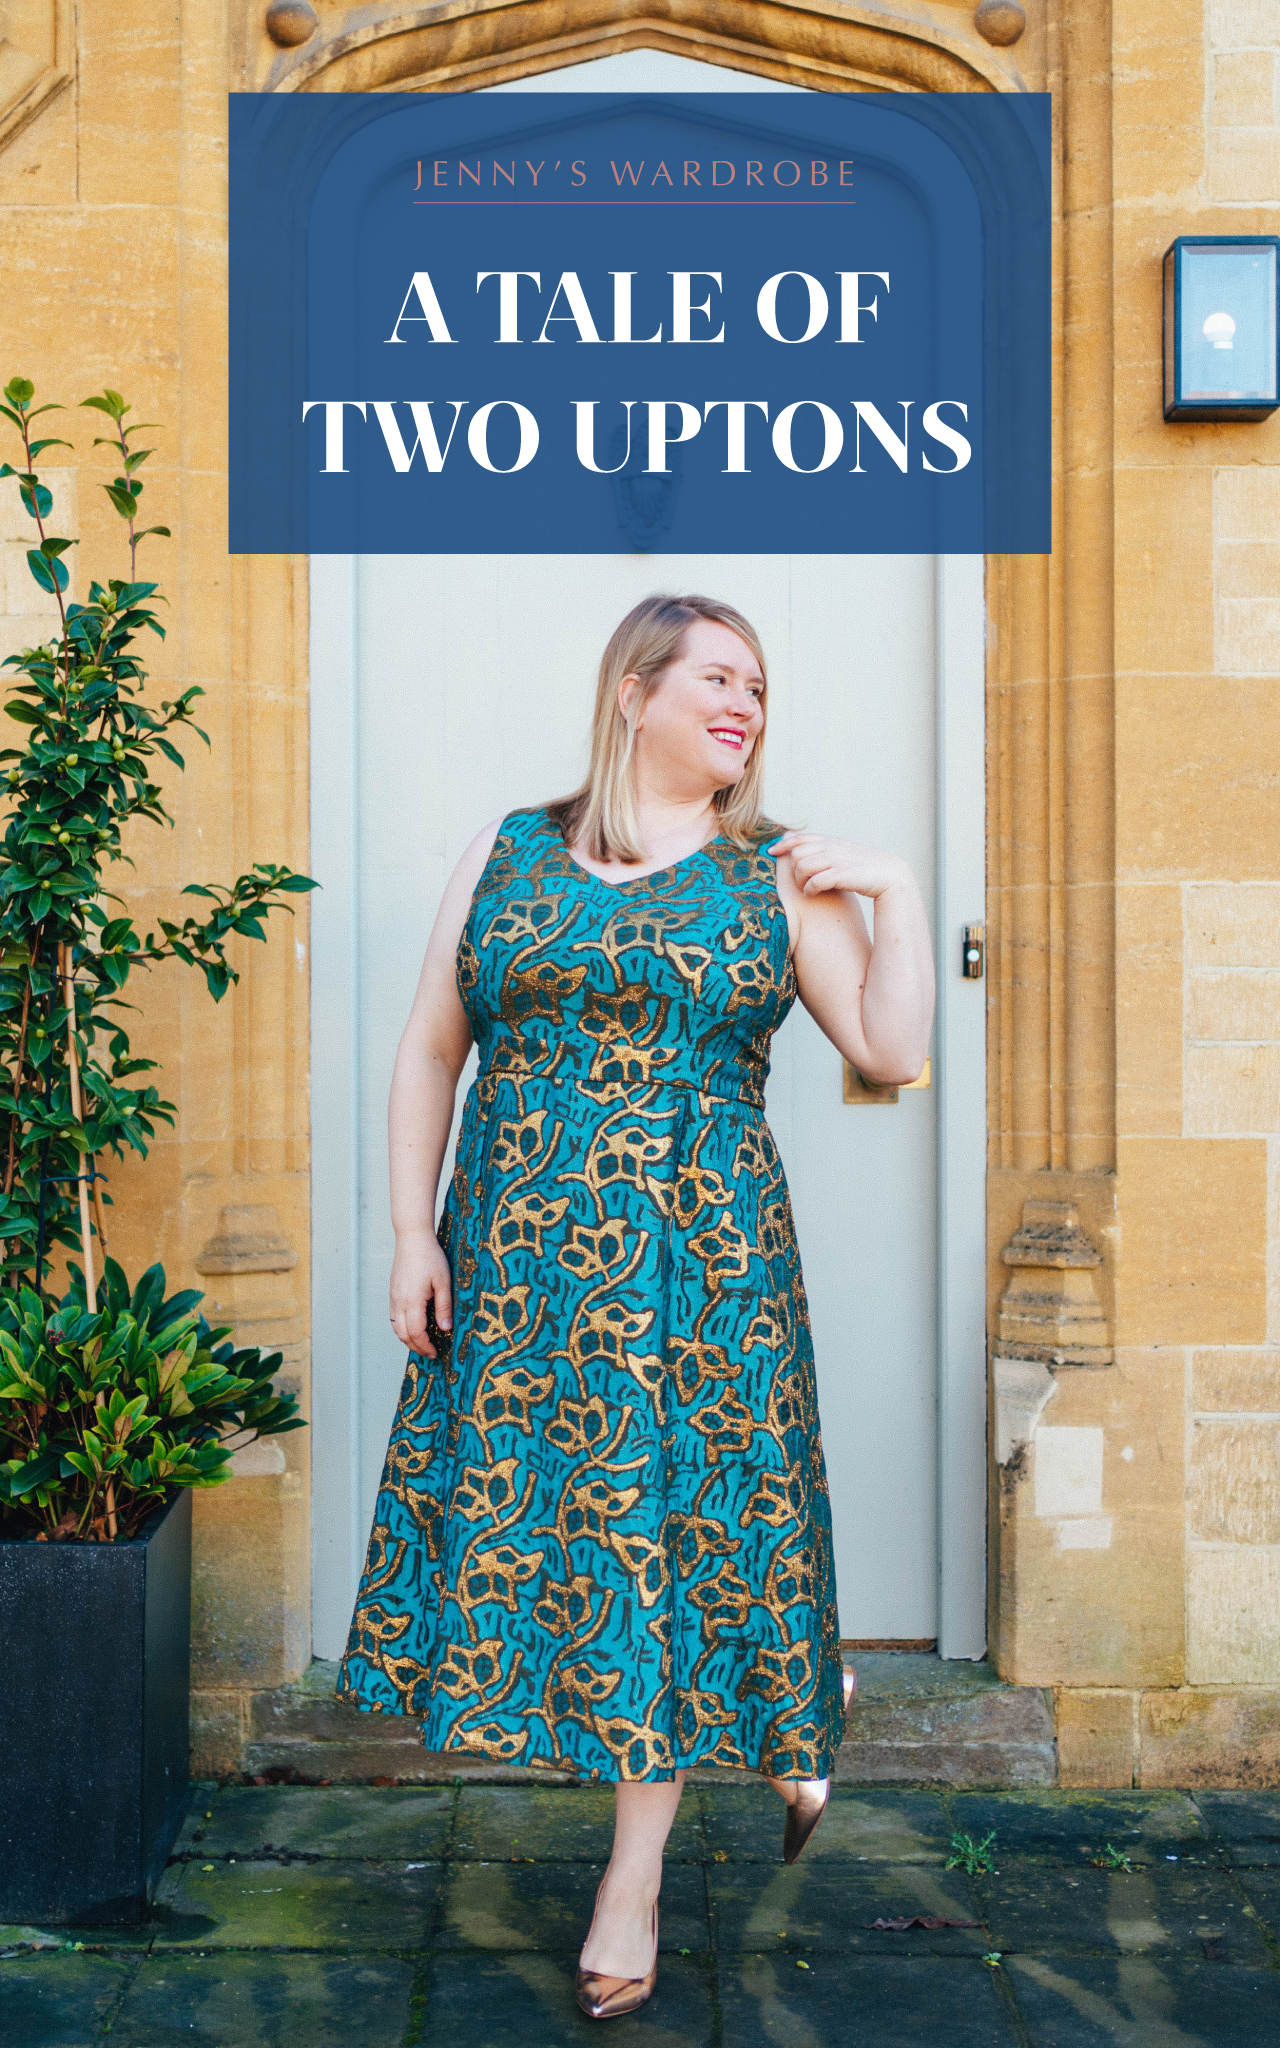 A tale of two Uptons (Upton Dress Expansion Packs, that is